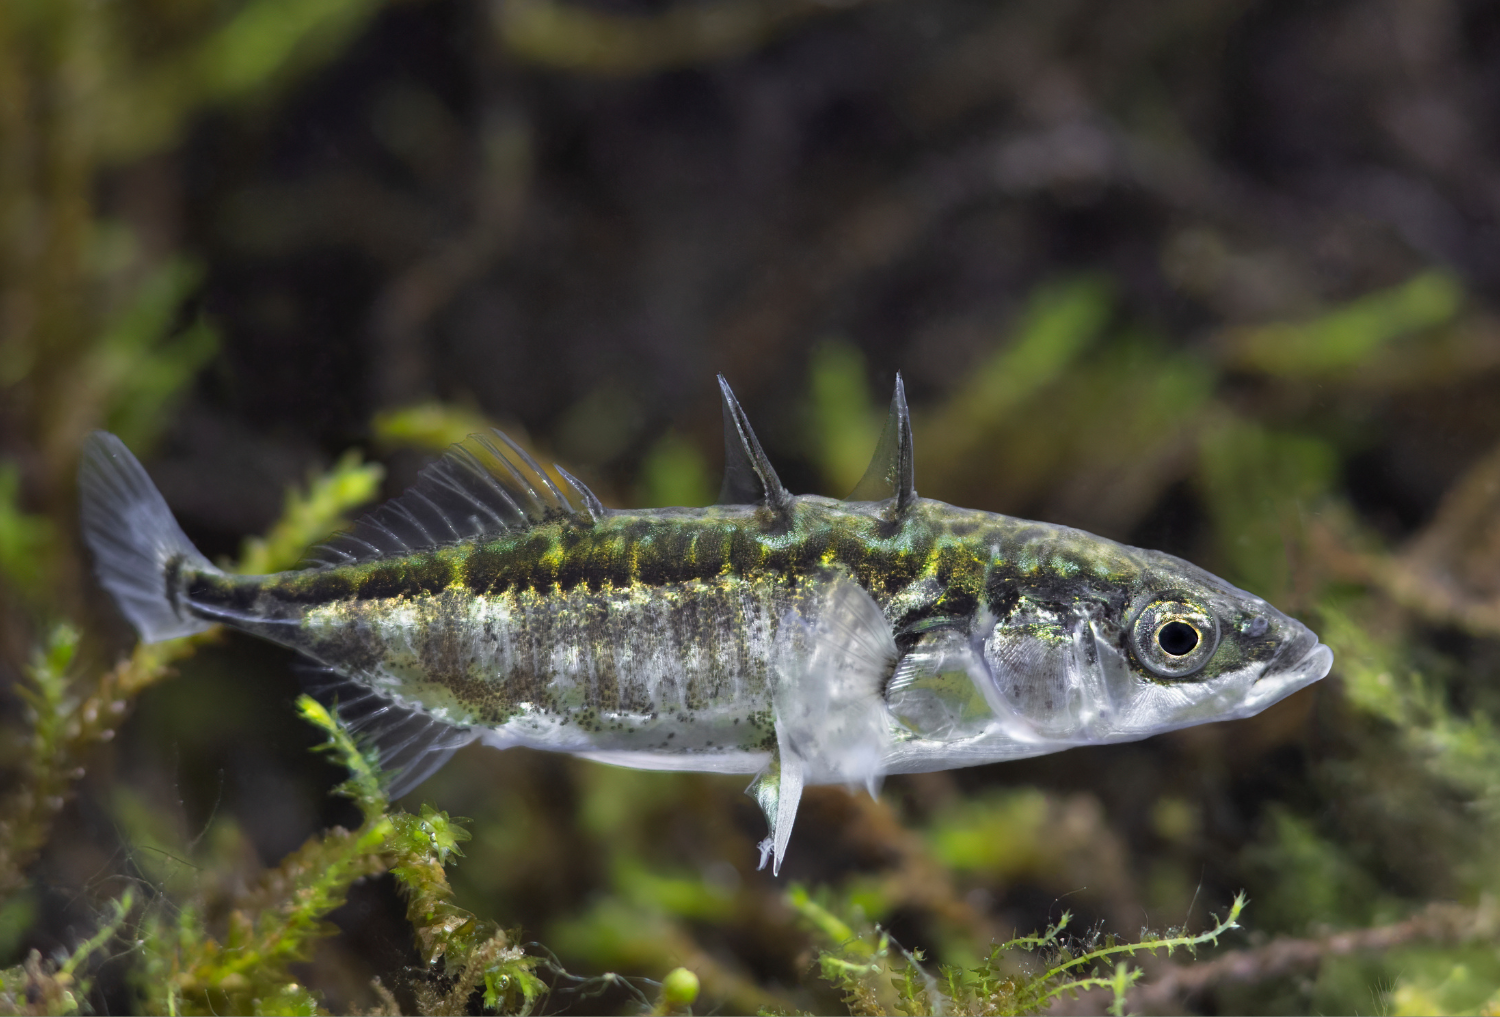 A stickleback fish swimming in water.